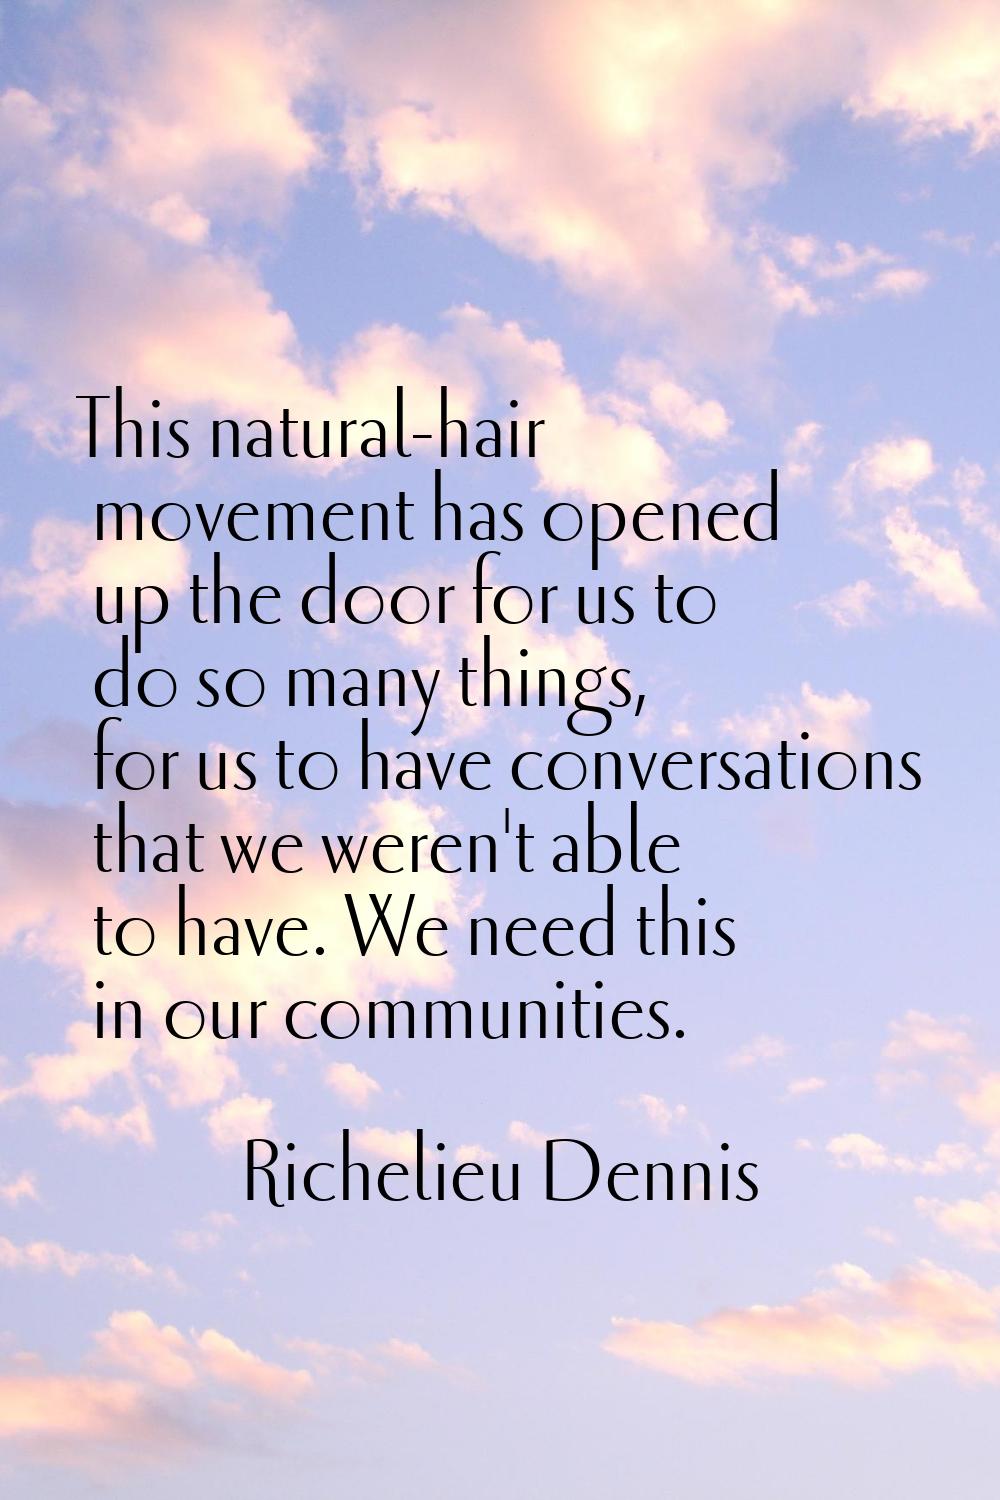 This natural-hair movement has opened up the door for us to do so many things, for us to have conve